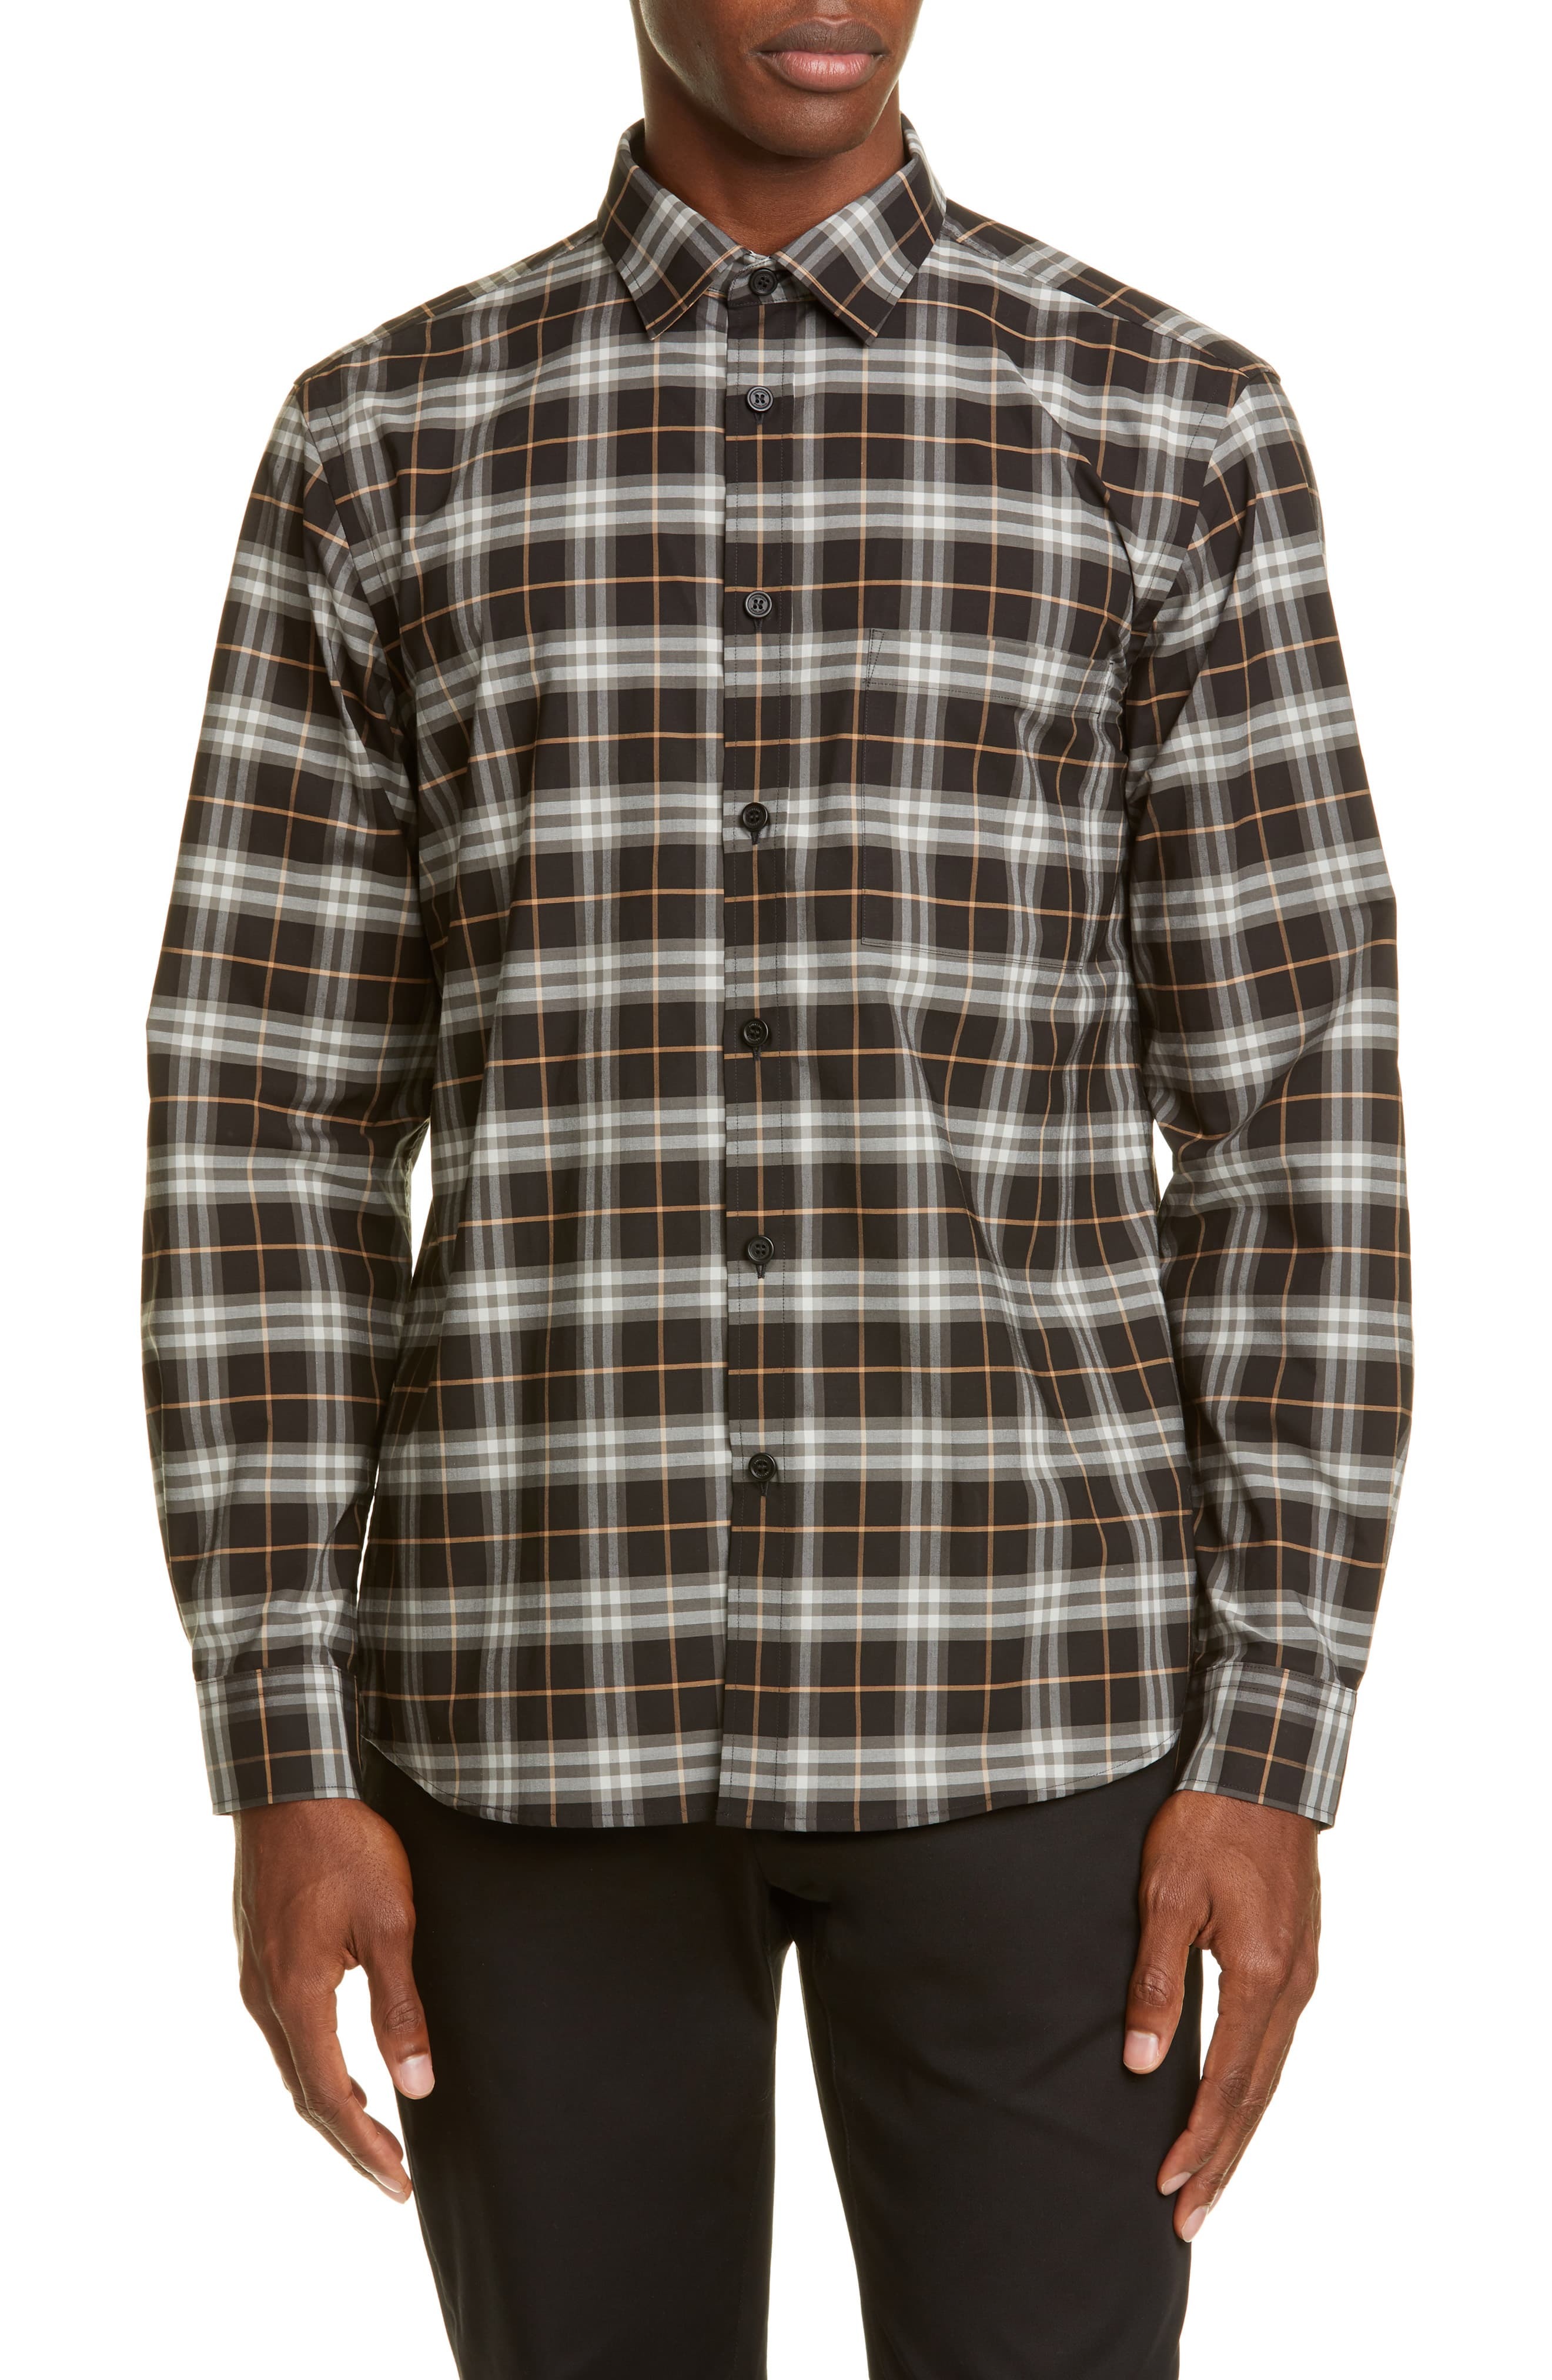 Burberry Simpson Plaid Button Up Shirt, $194 | Nordstrom | Lookastic